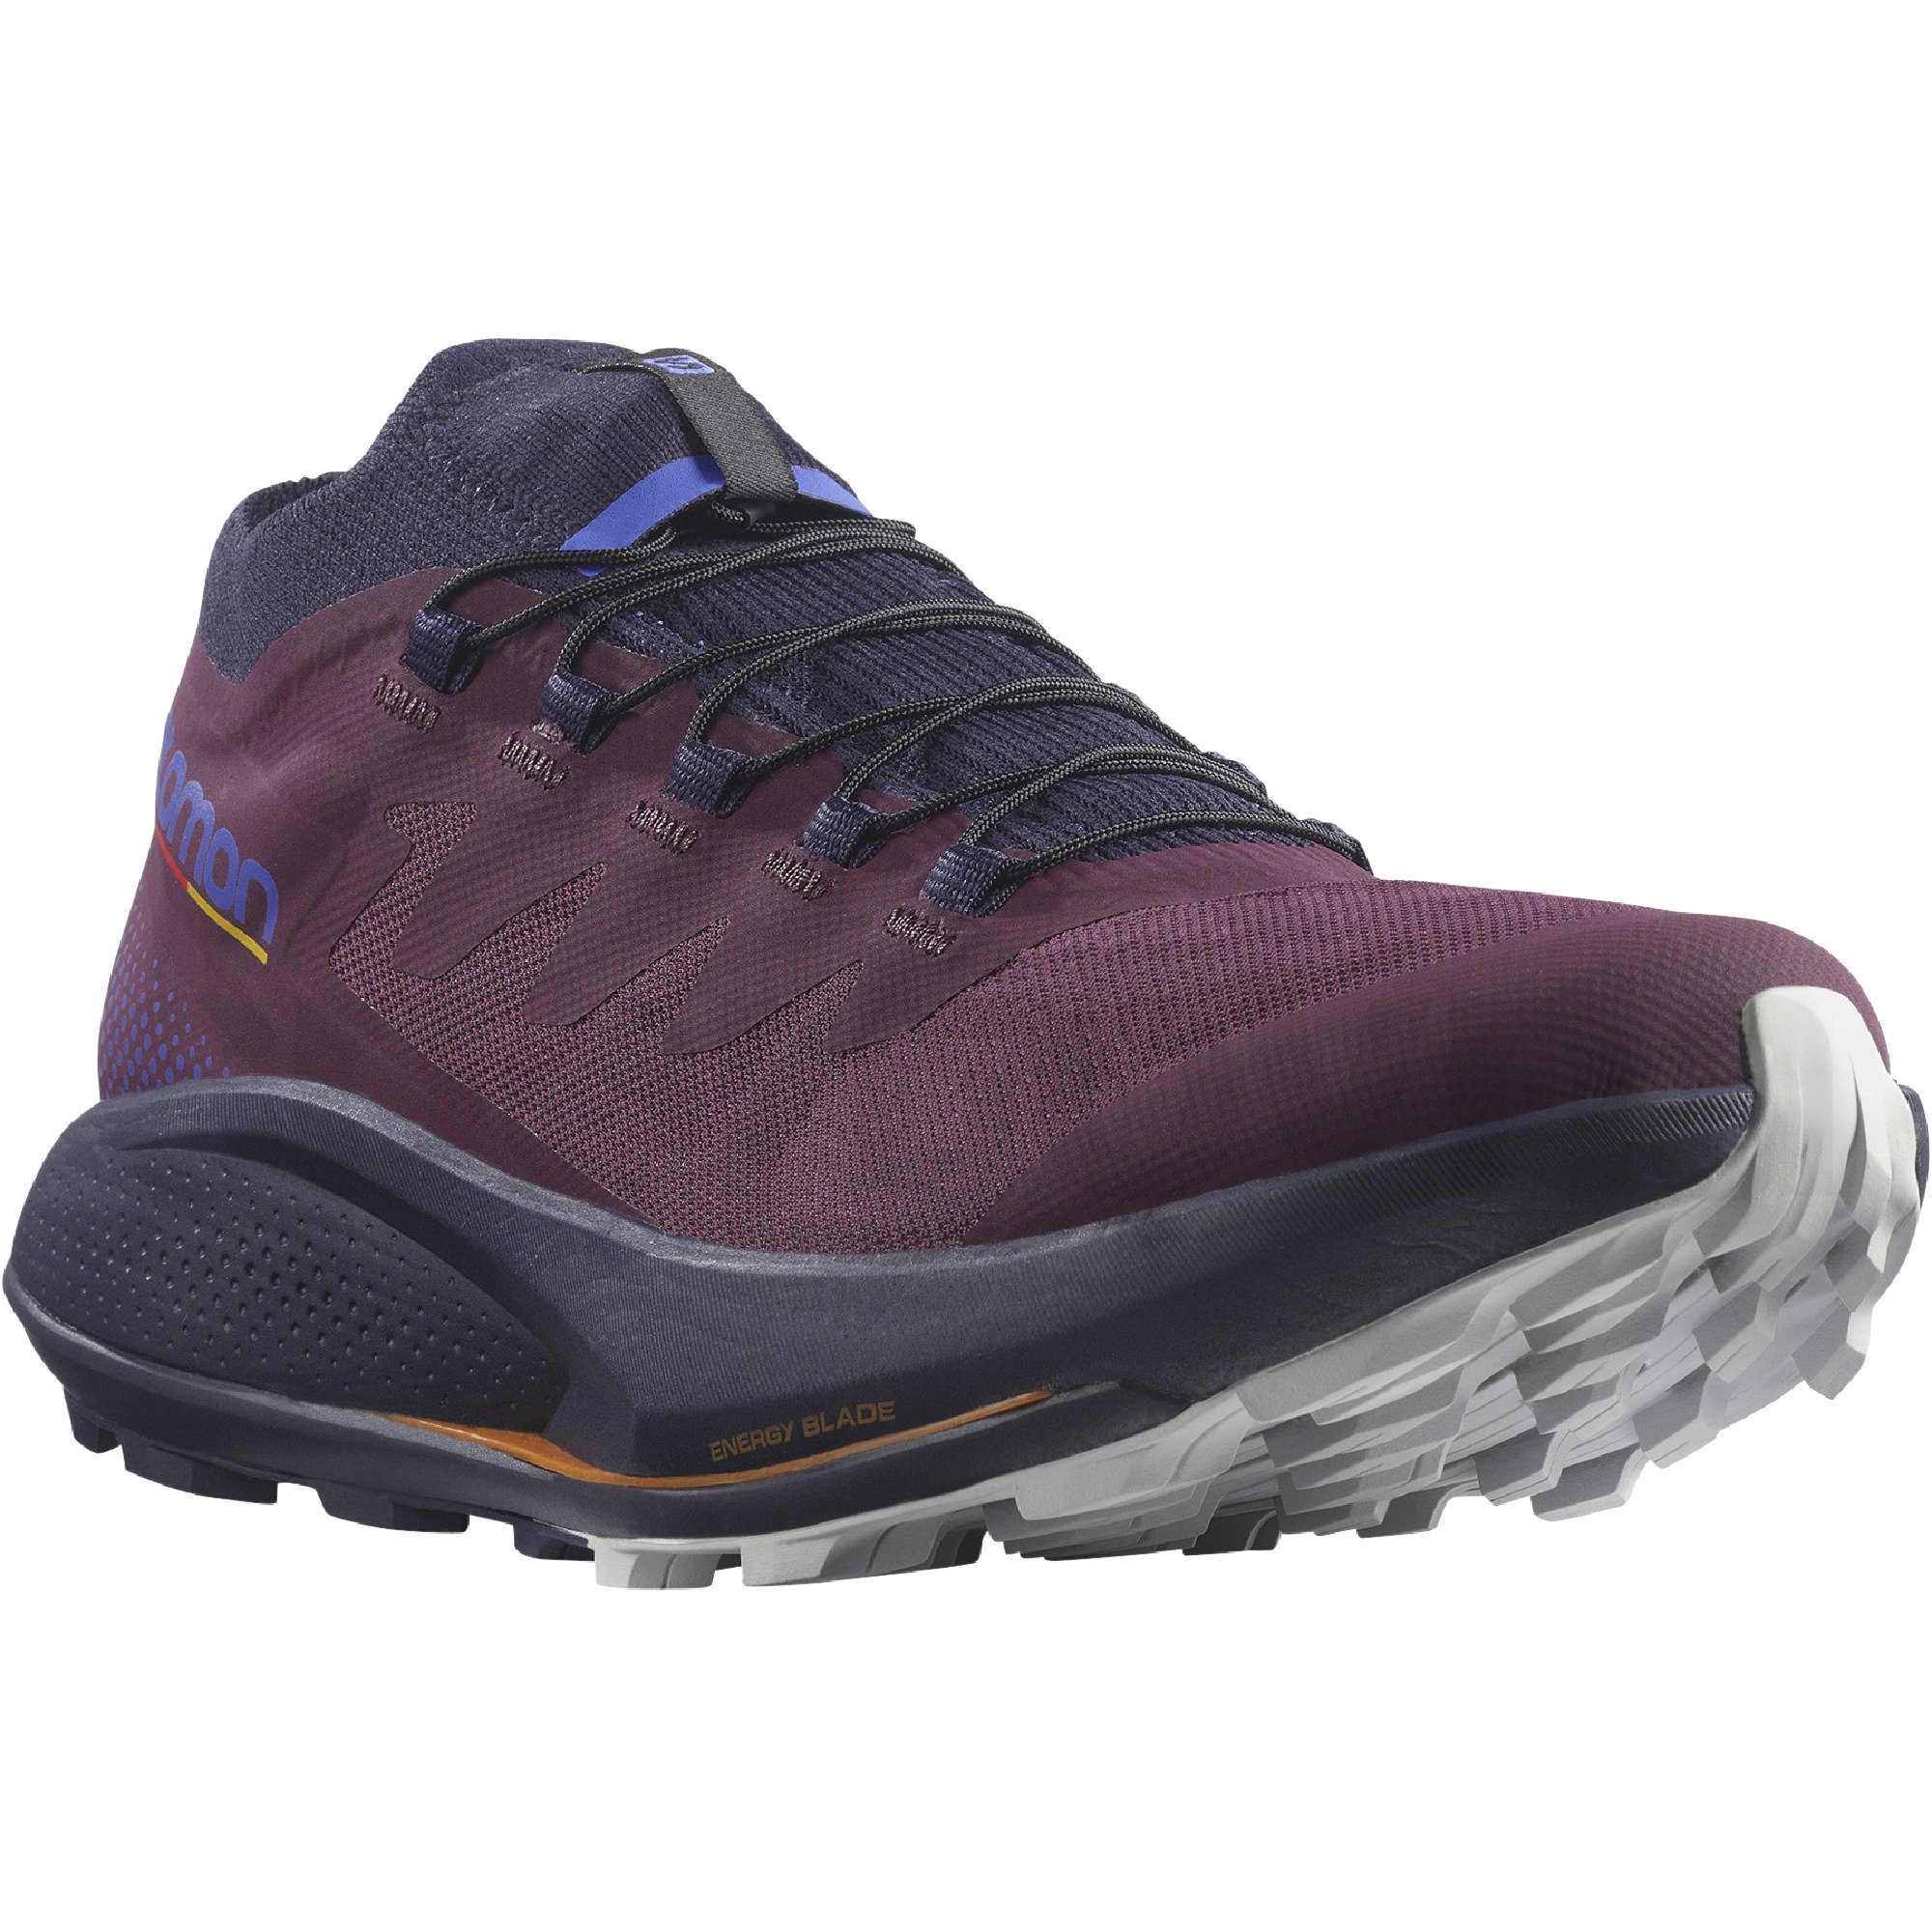 L41608200_5_GHO_PULSAR TRAIL_PRO W Grape Wine_N.png.high-res